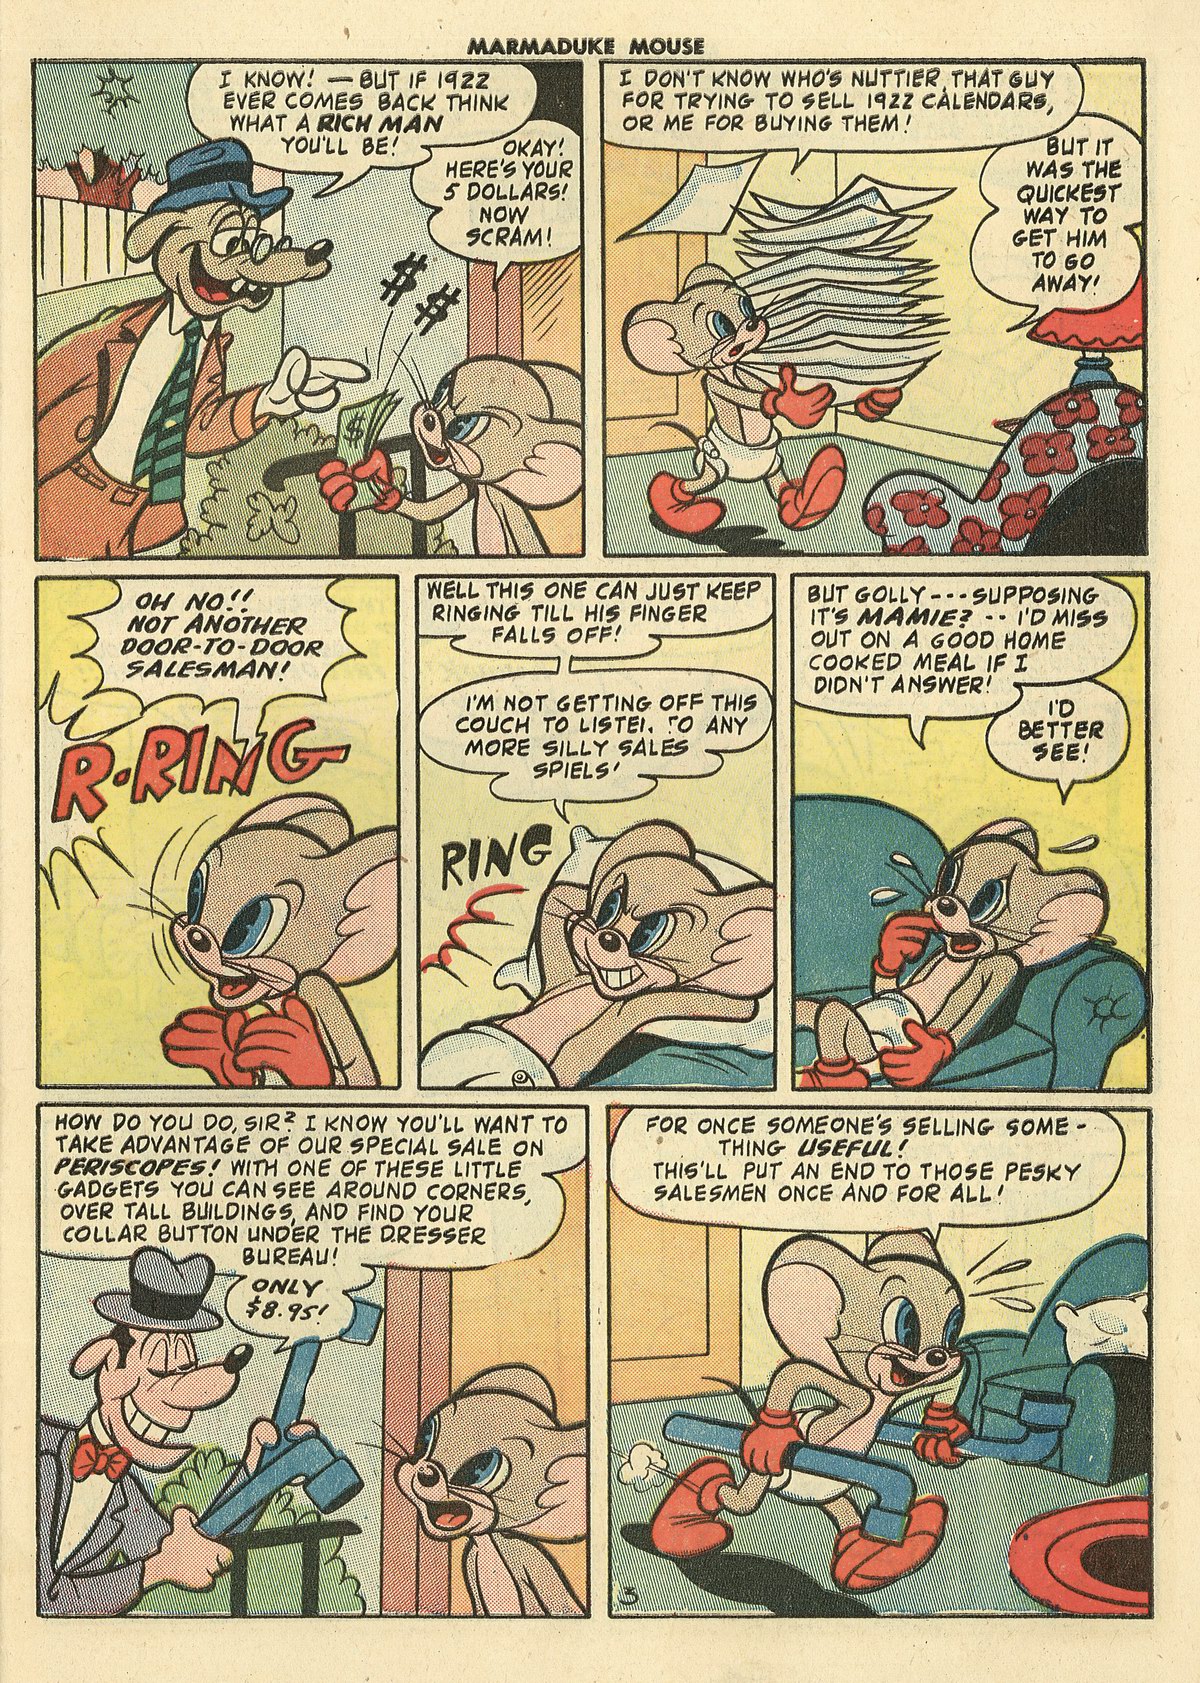 Read online Marmaduke Mouse comic -  Issue #49 - 5